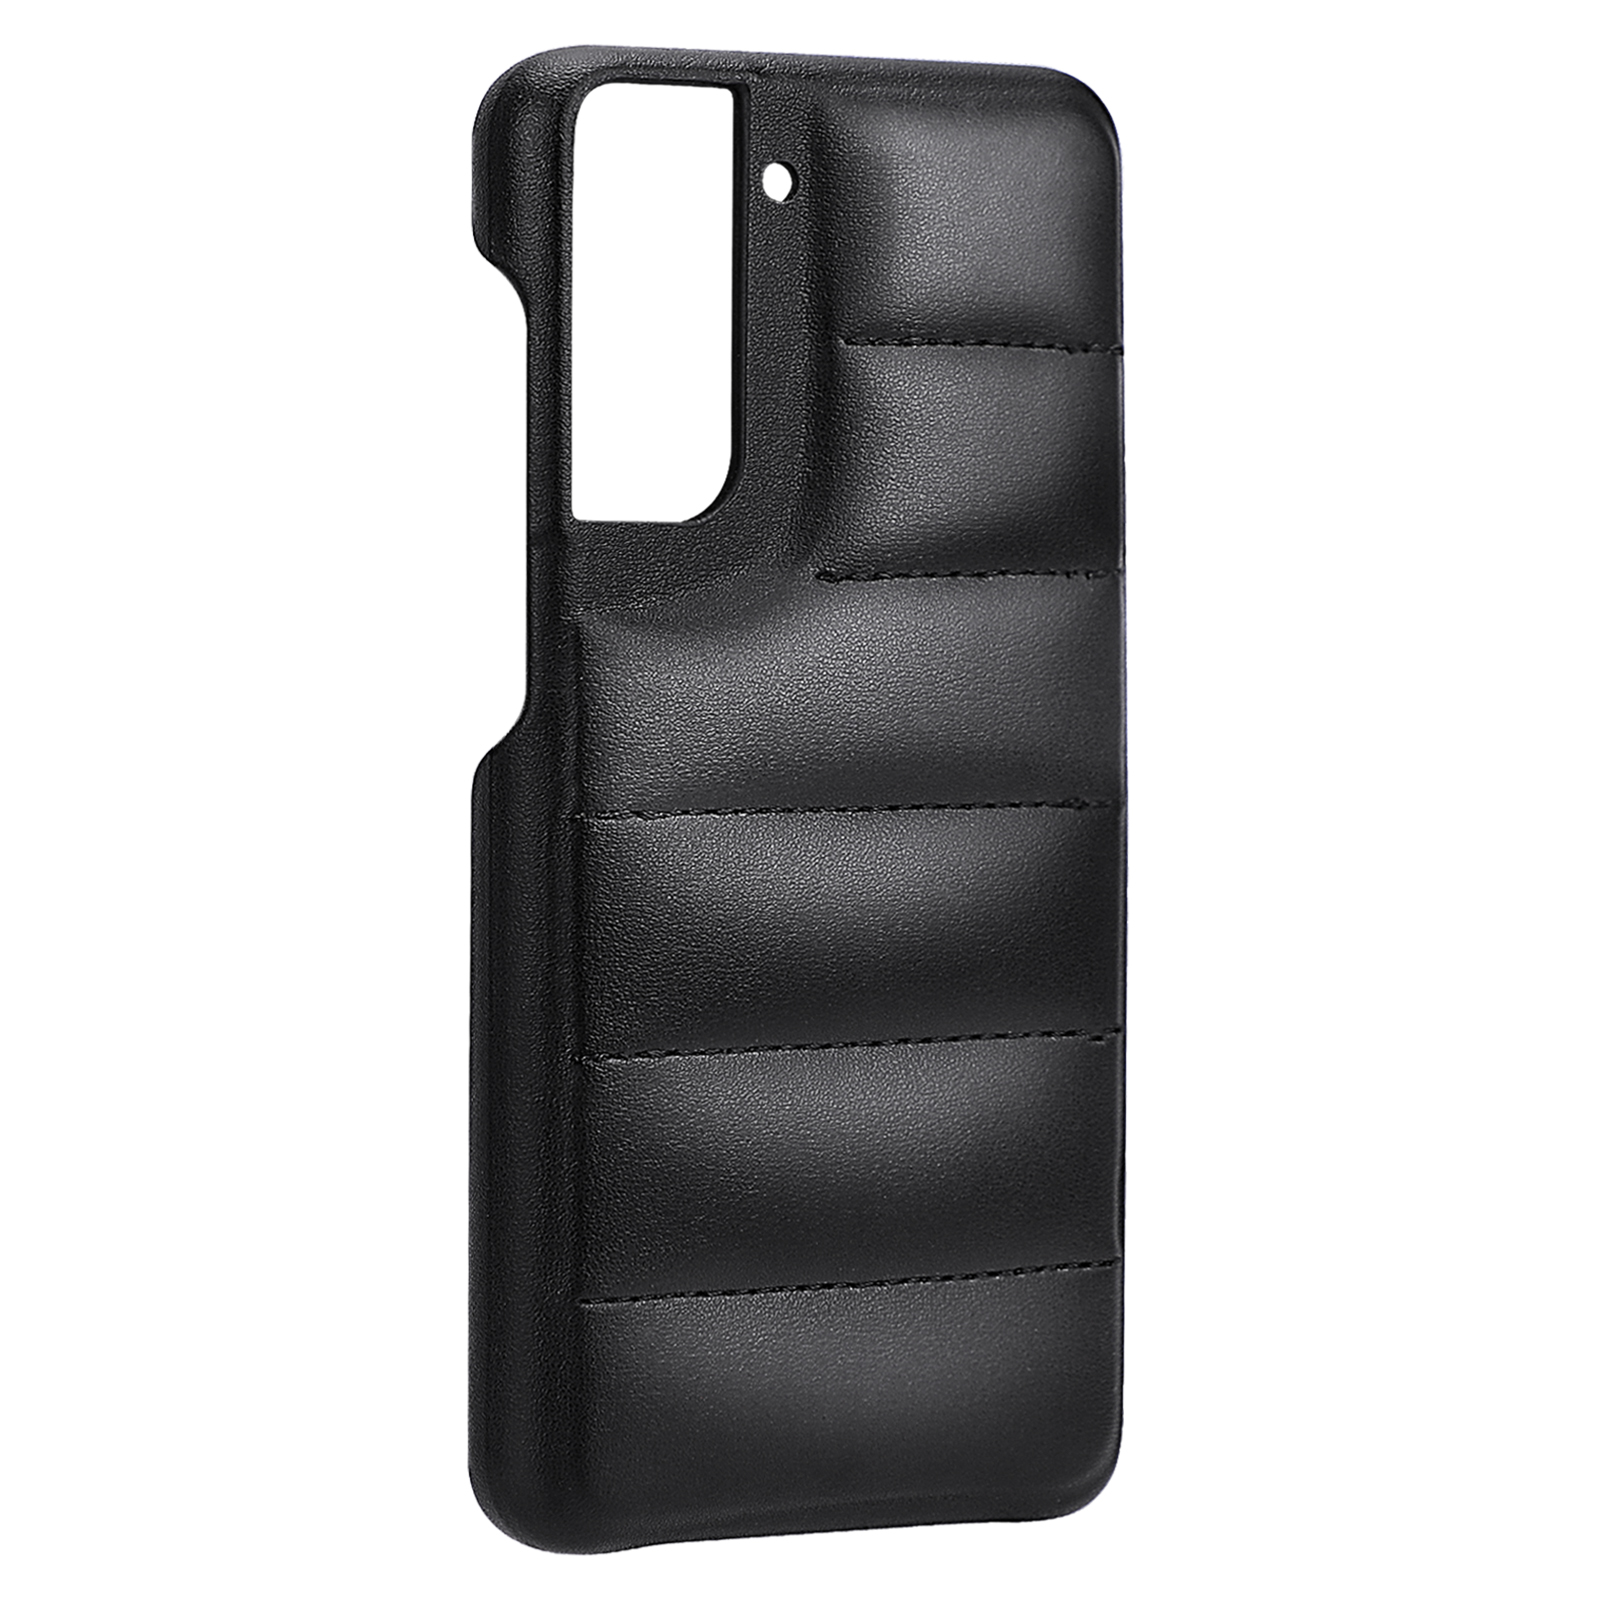 Hot Off for Samsung Galaxy S21 Case, Nappa Leather Puffer Phone Case, Galaxy S21 Case [Full Body Protection] [Non-Slip] Shockproof Protective Phone Case, Black for Galaxy S21 - image 2 of 5